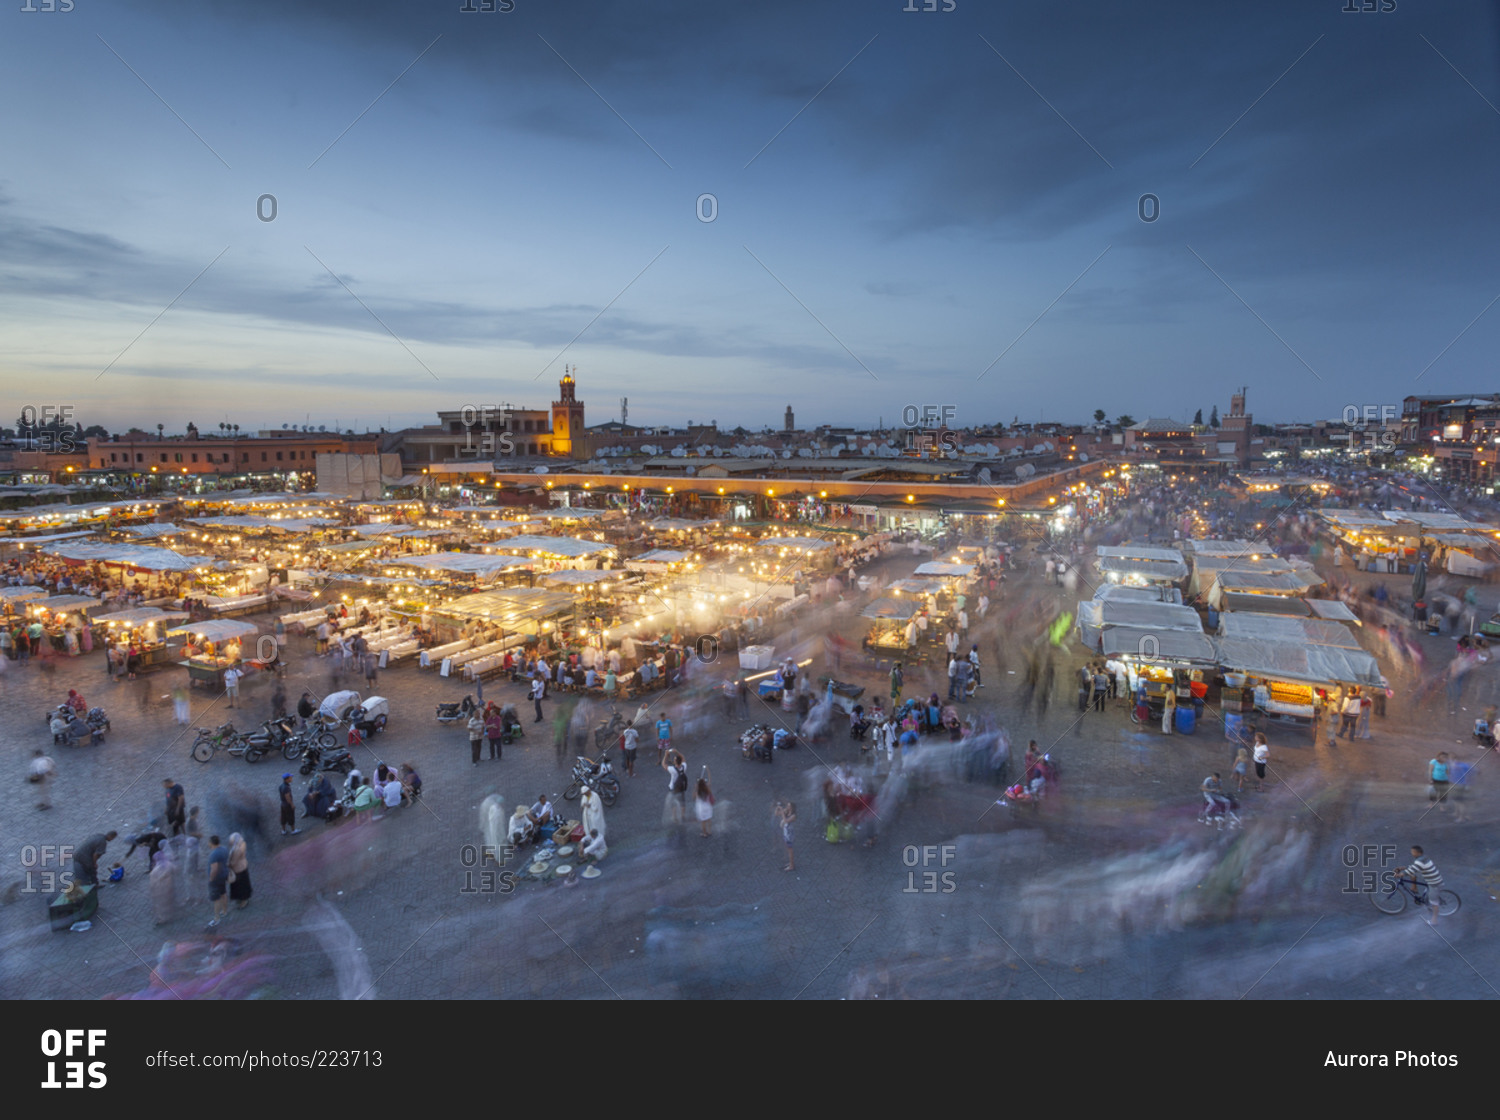 Crowds and food stalls in Jemaa al Fna square at sunset Marrakesh, Morocco